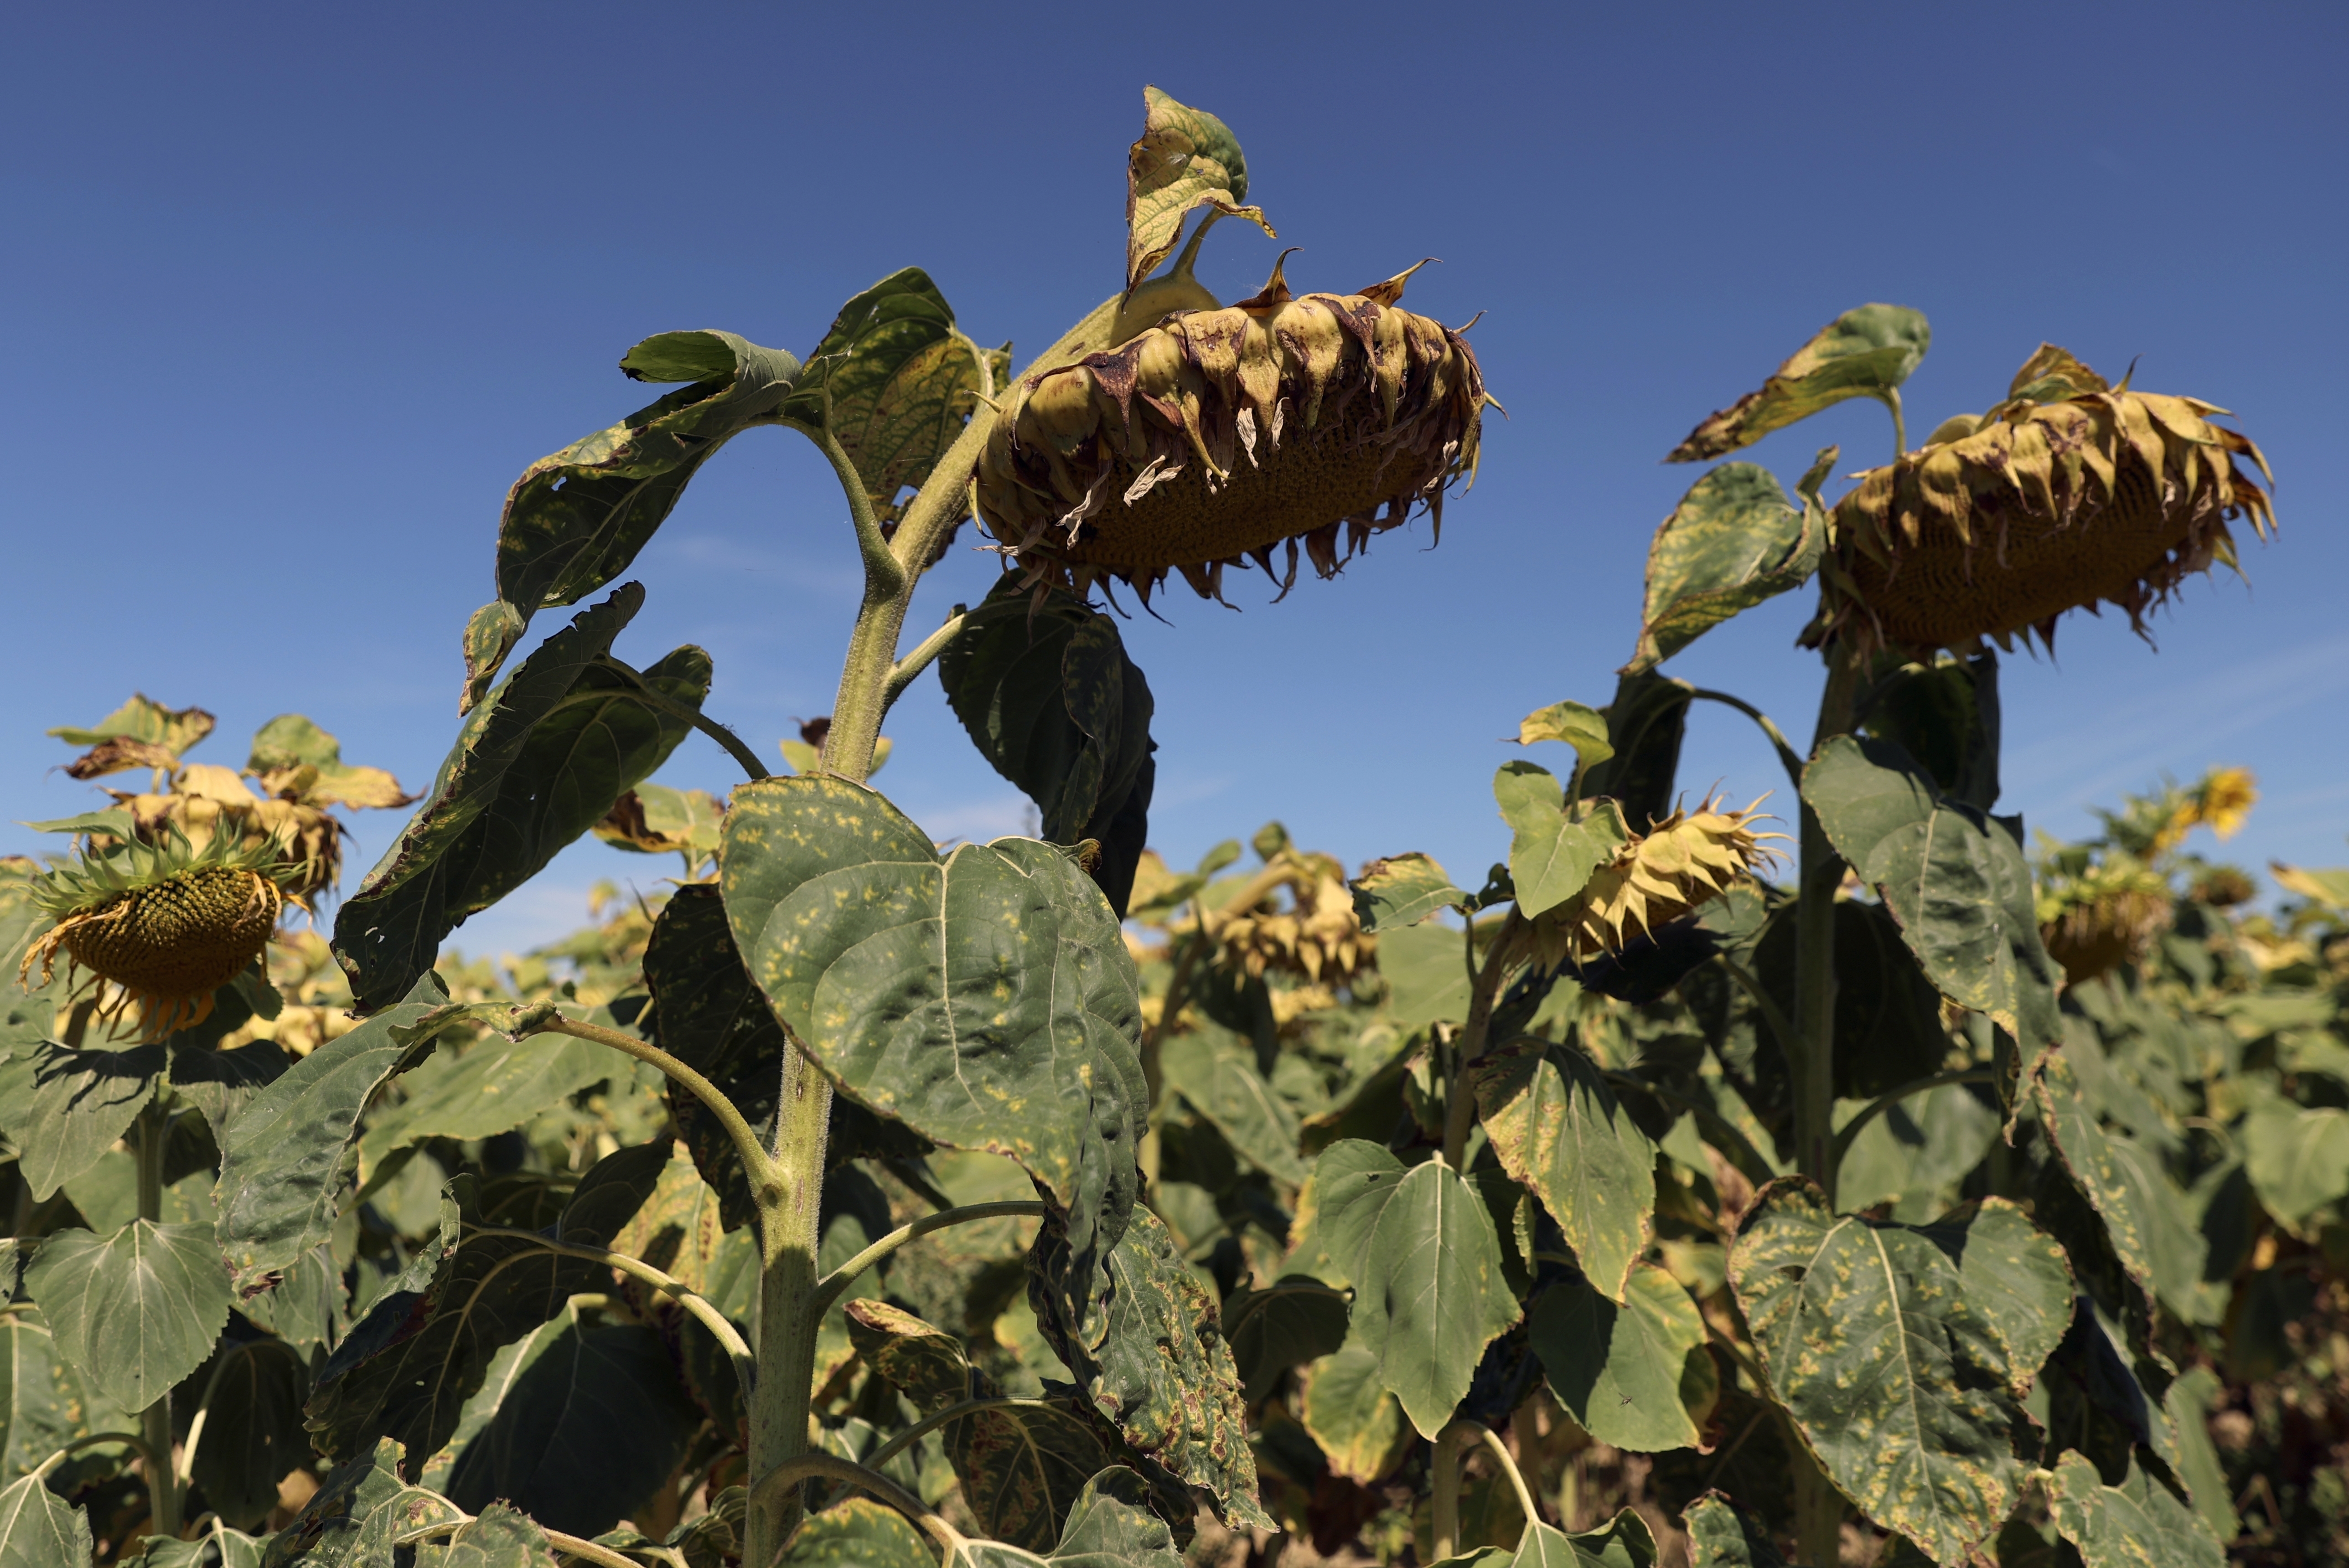 Sunflowers suffer from lack of water, as Europe is under an unusually extreme heat wave, in Ury, south of Paris, France, Aug. 8, 2022 